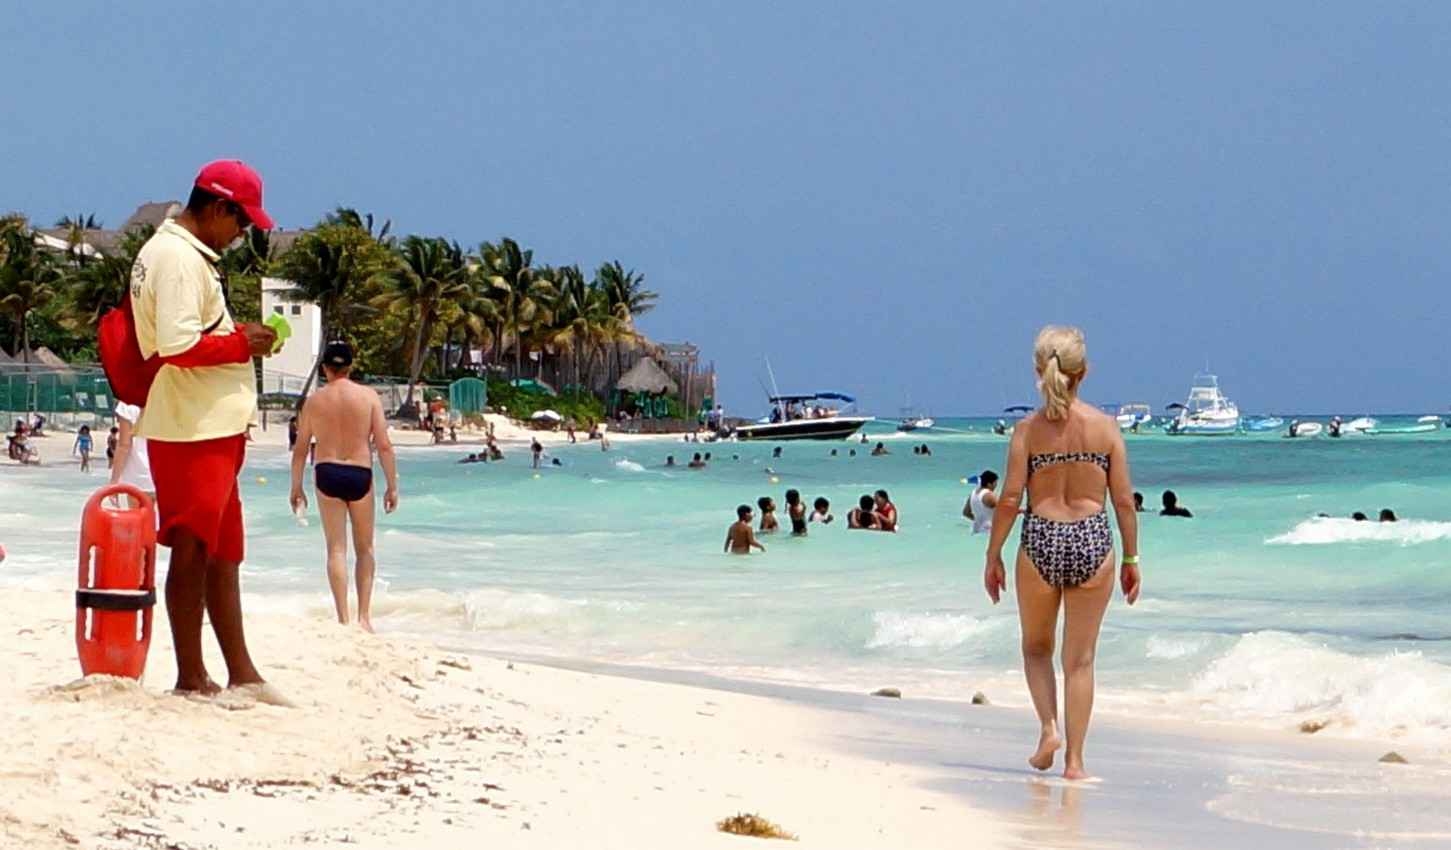 A middle-aged woman walked down the beach near a lifeguard in Playa Del Carmen.